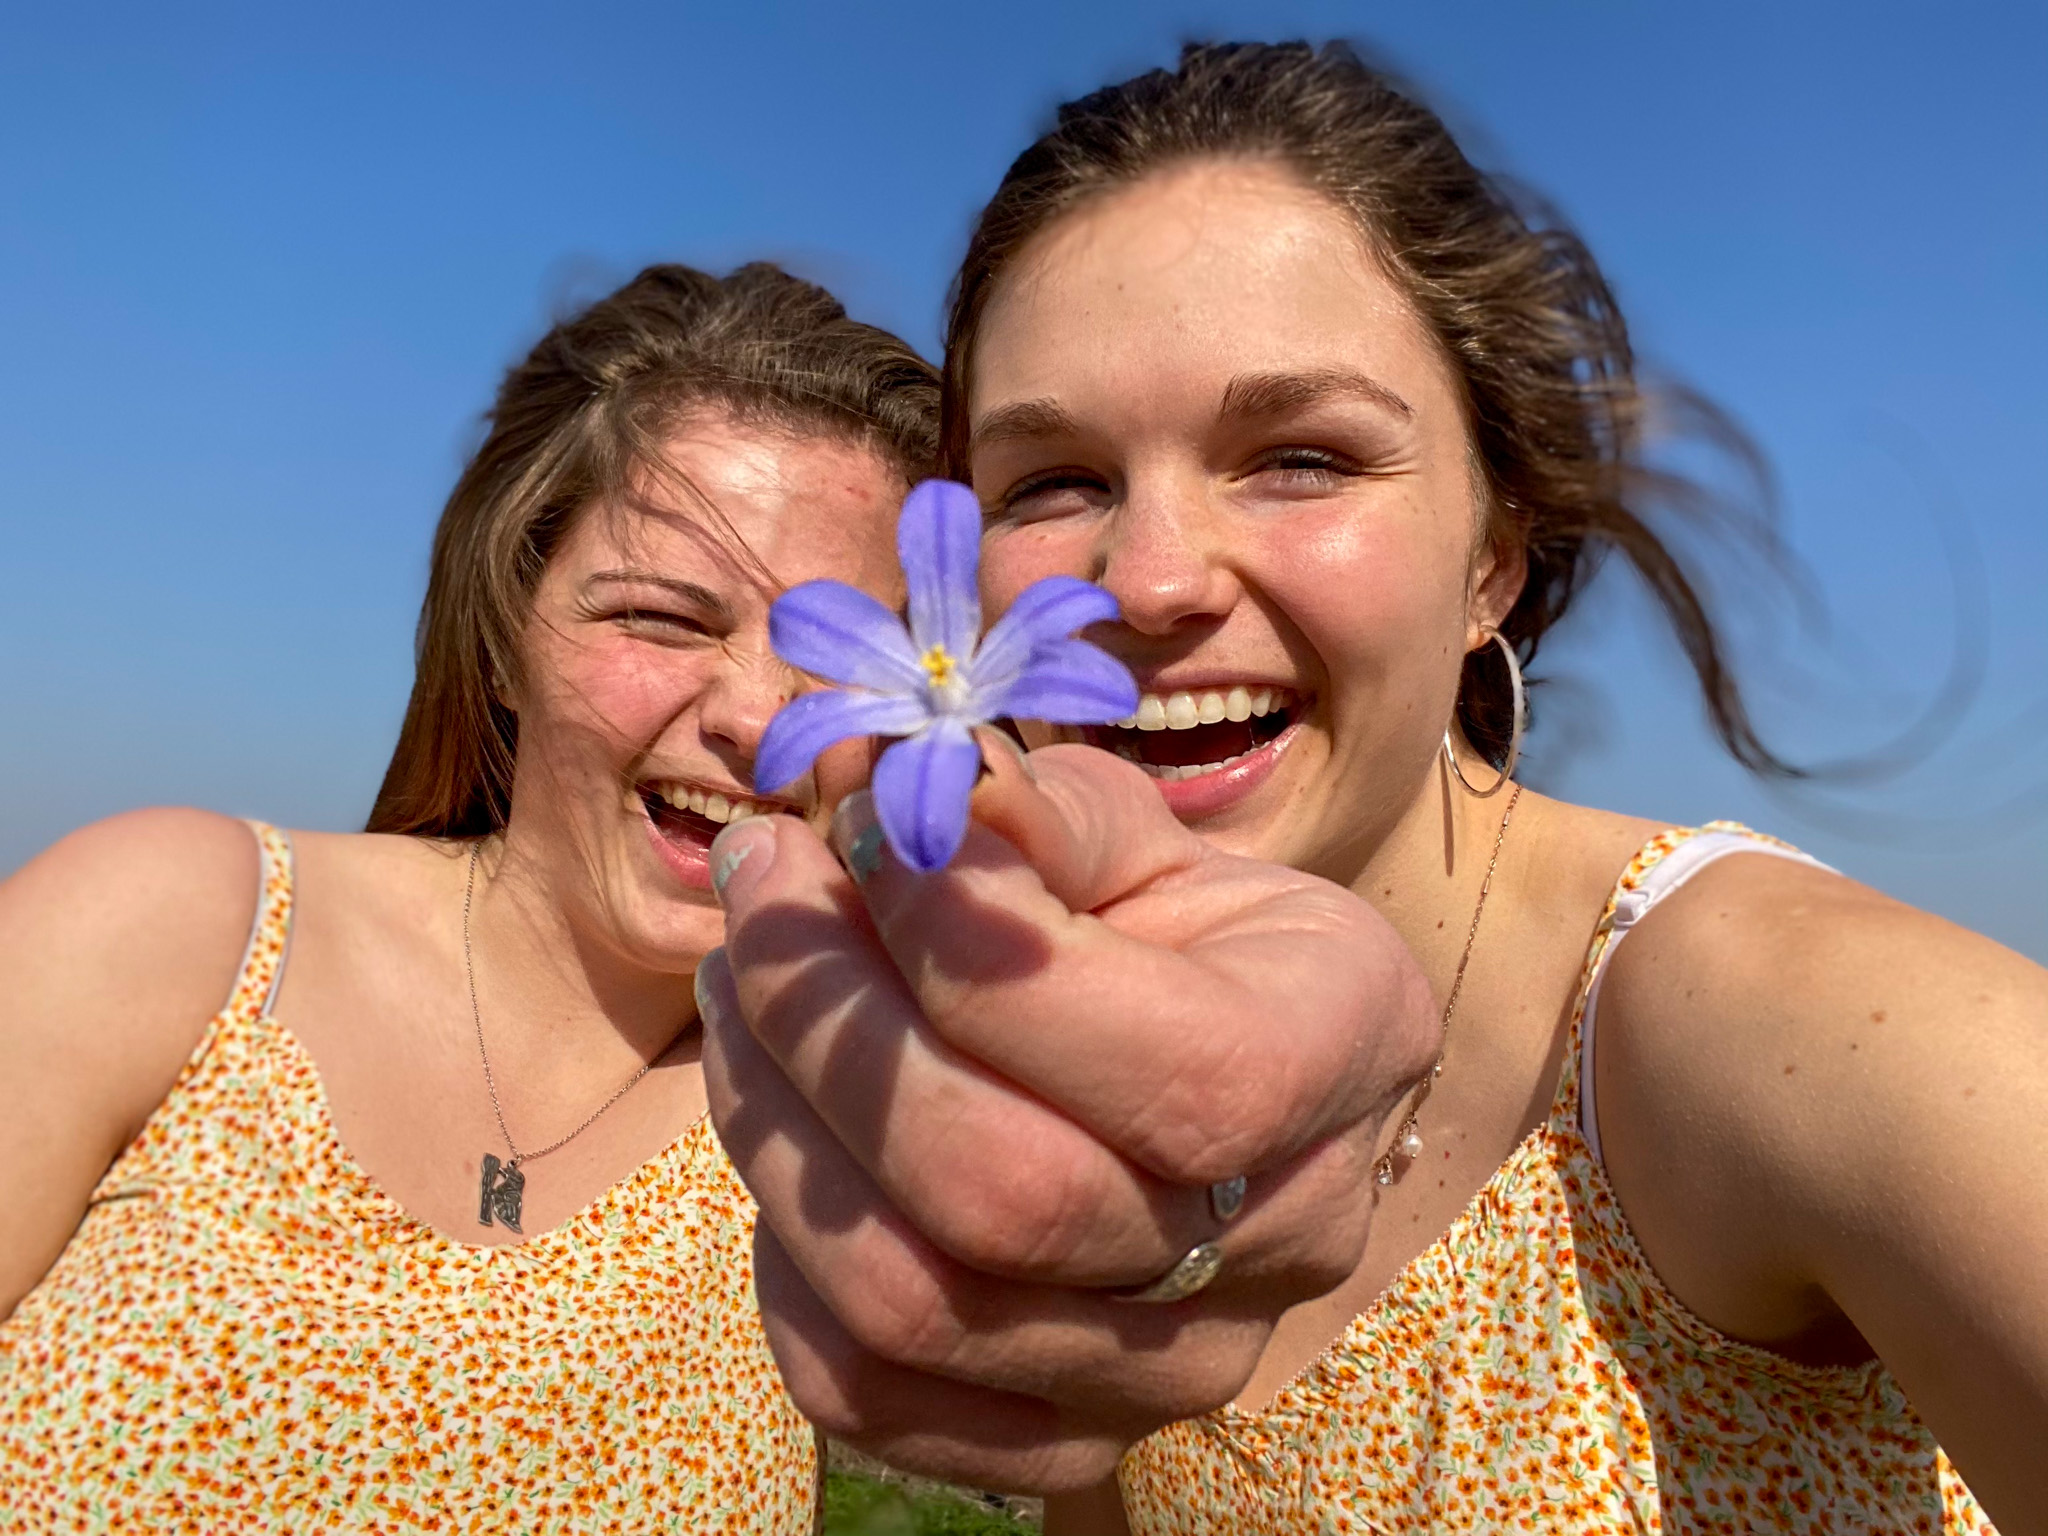 Sisters, Jamie and Jennie, smile together while holding out a small, purple flower. 